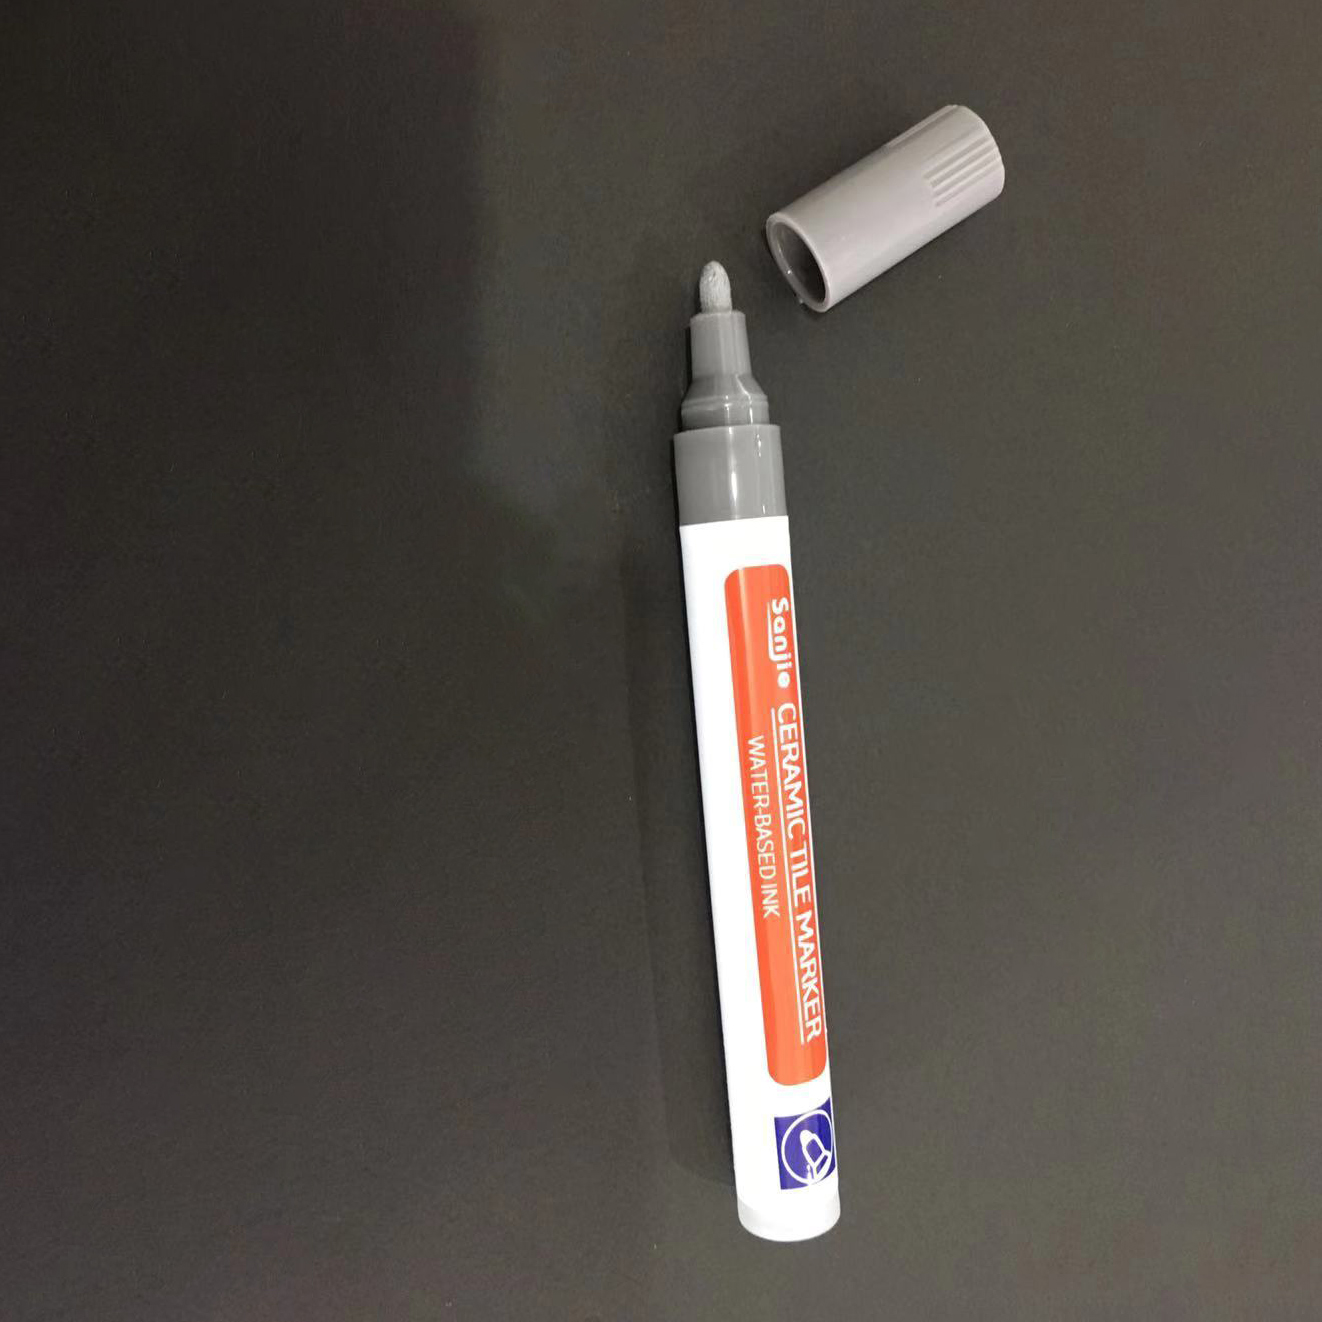 Tile Marker Repair Wall Grout Pen White Grout Marker Odorless Non-toxic -  Snngv